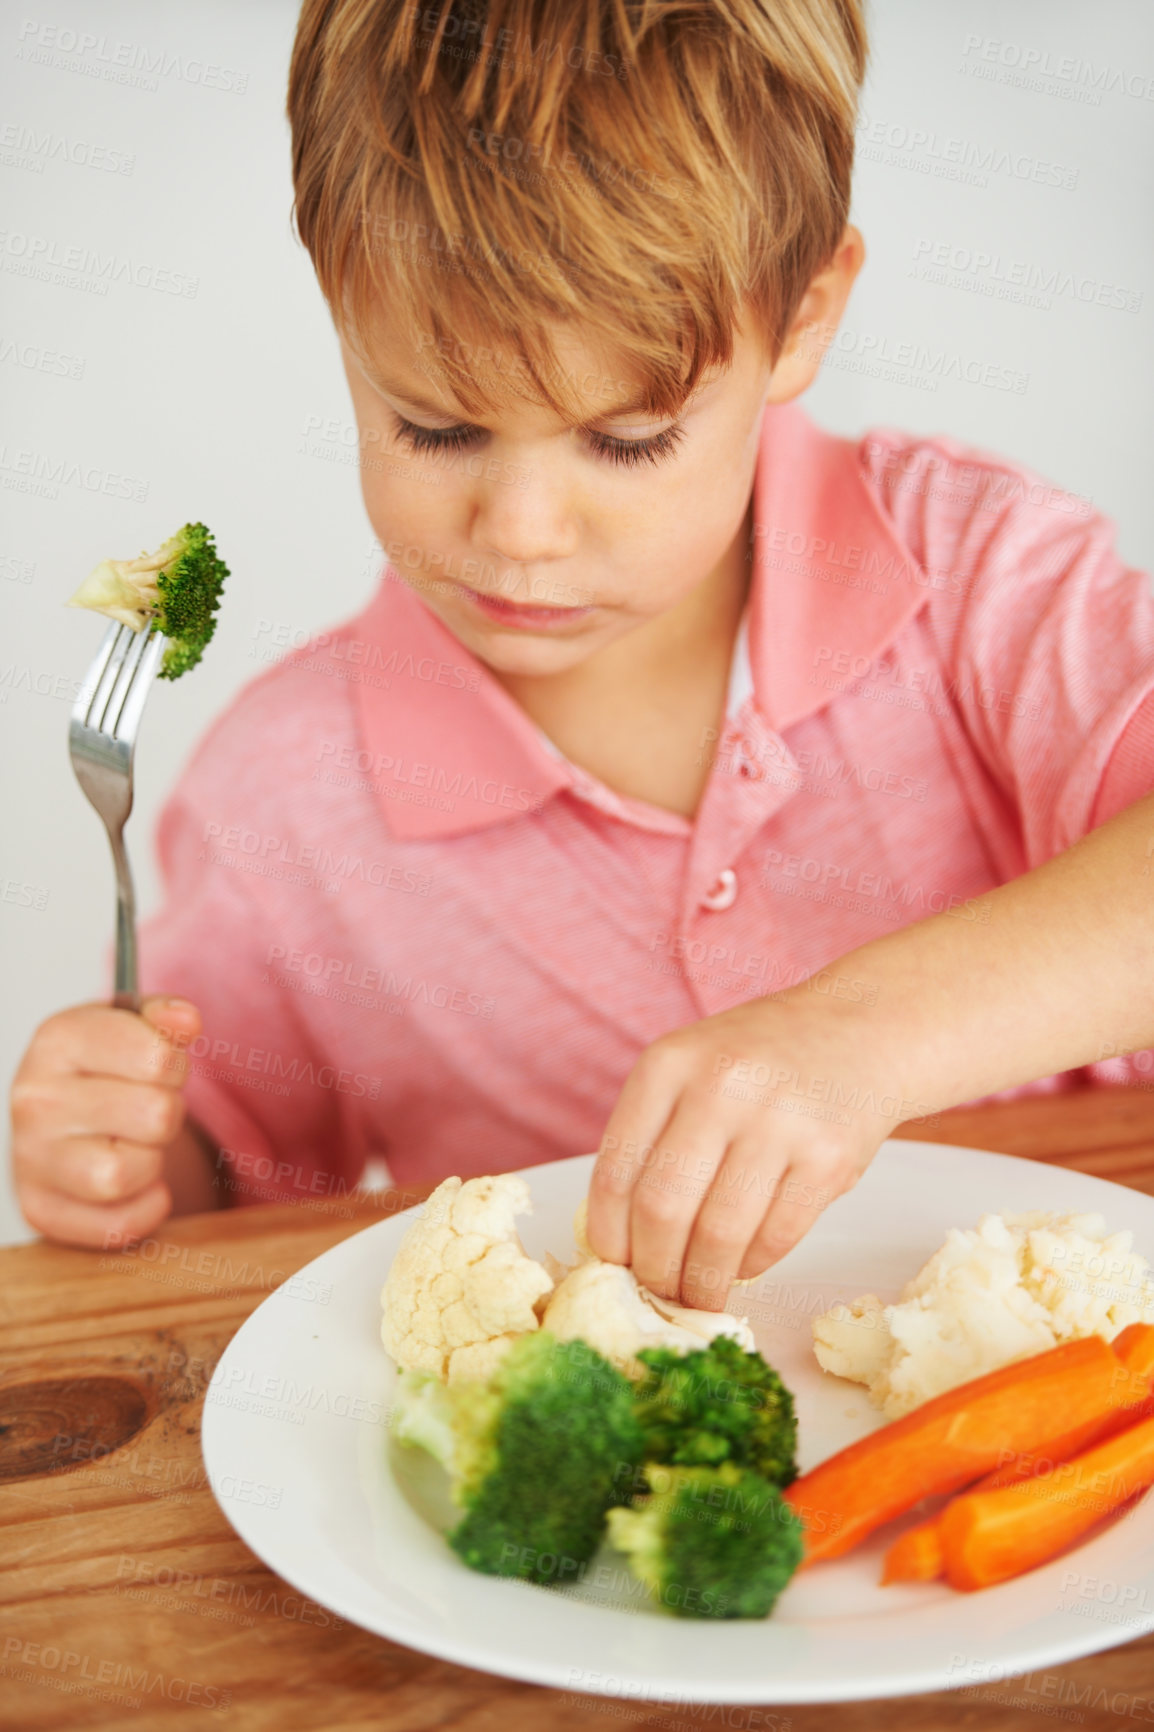 Buy stock photo A cute young boy playing with the vegetables on his plate